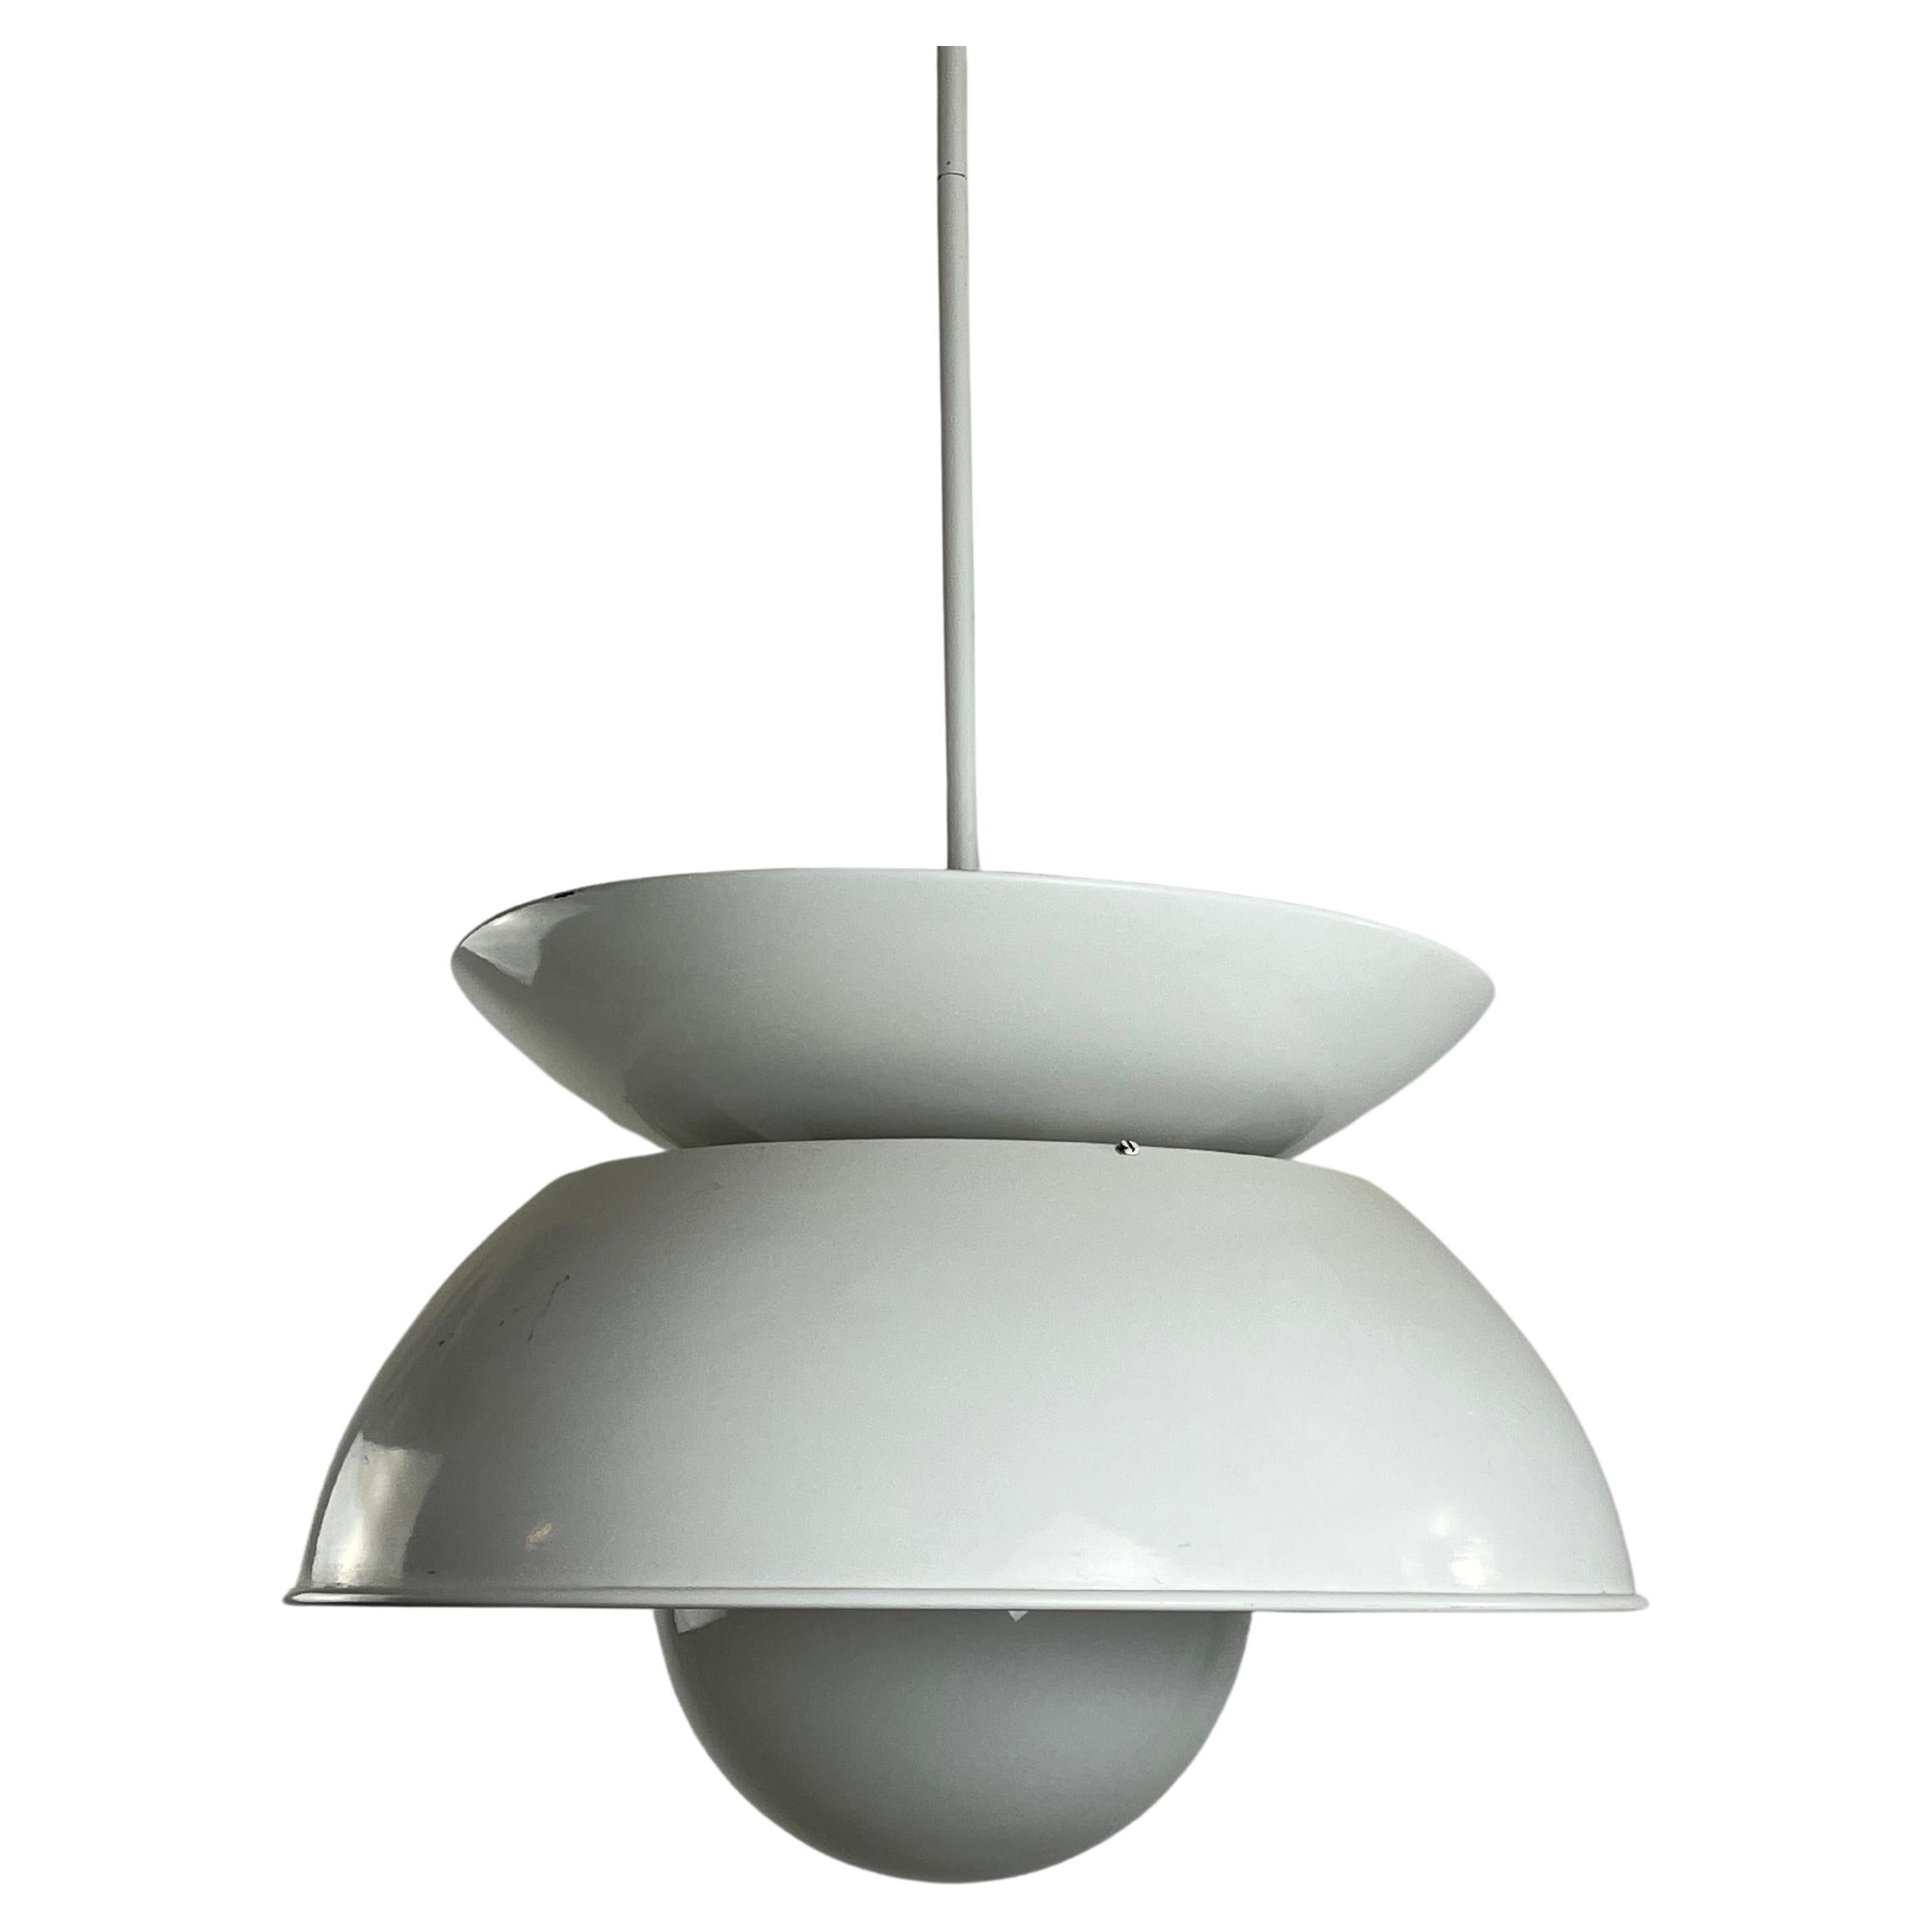 Mid-Century Cetra Model Chandelier Attributed To Vico Magistretti for Artemide